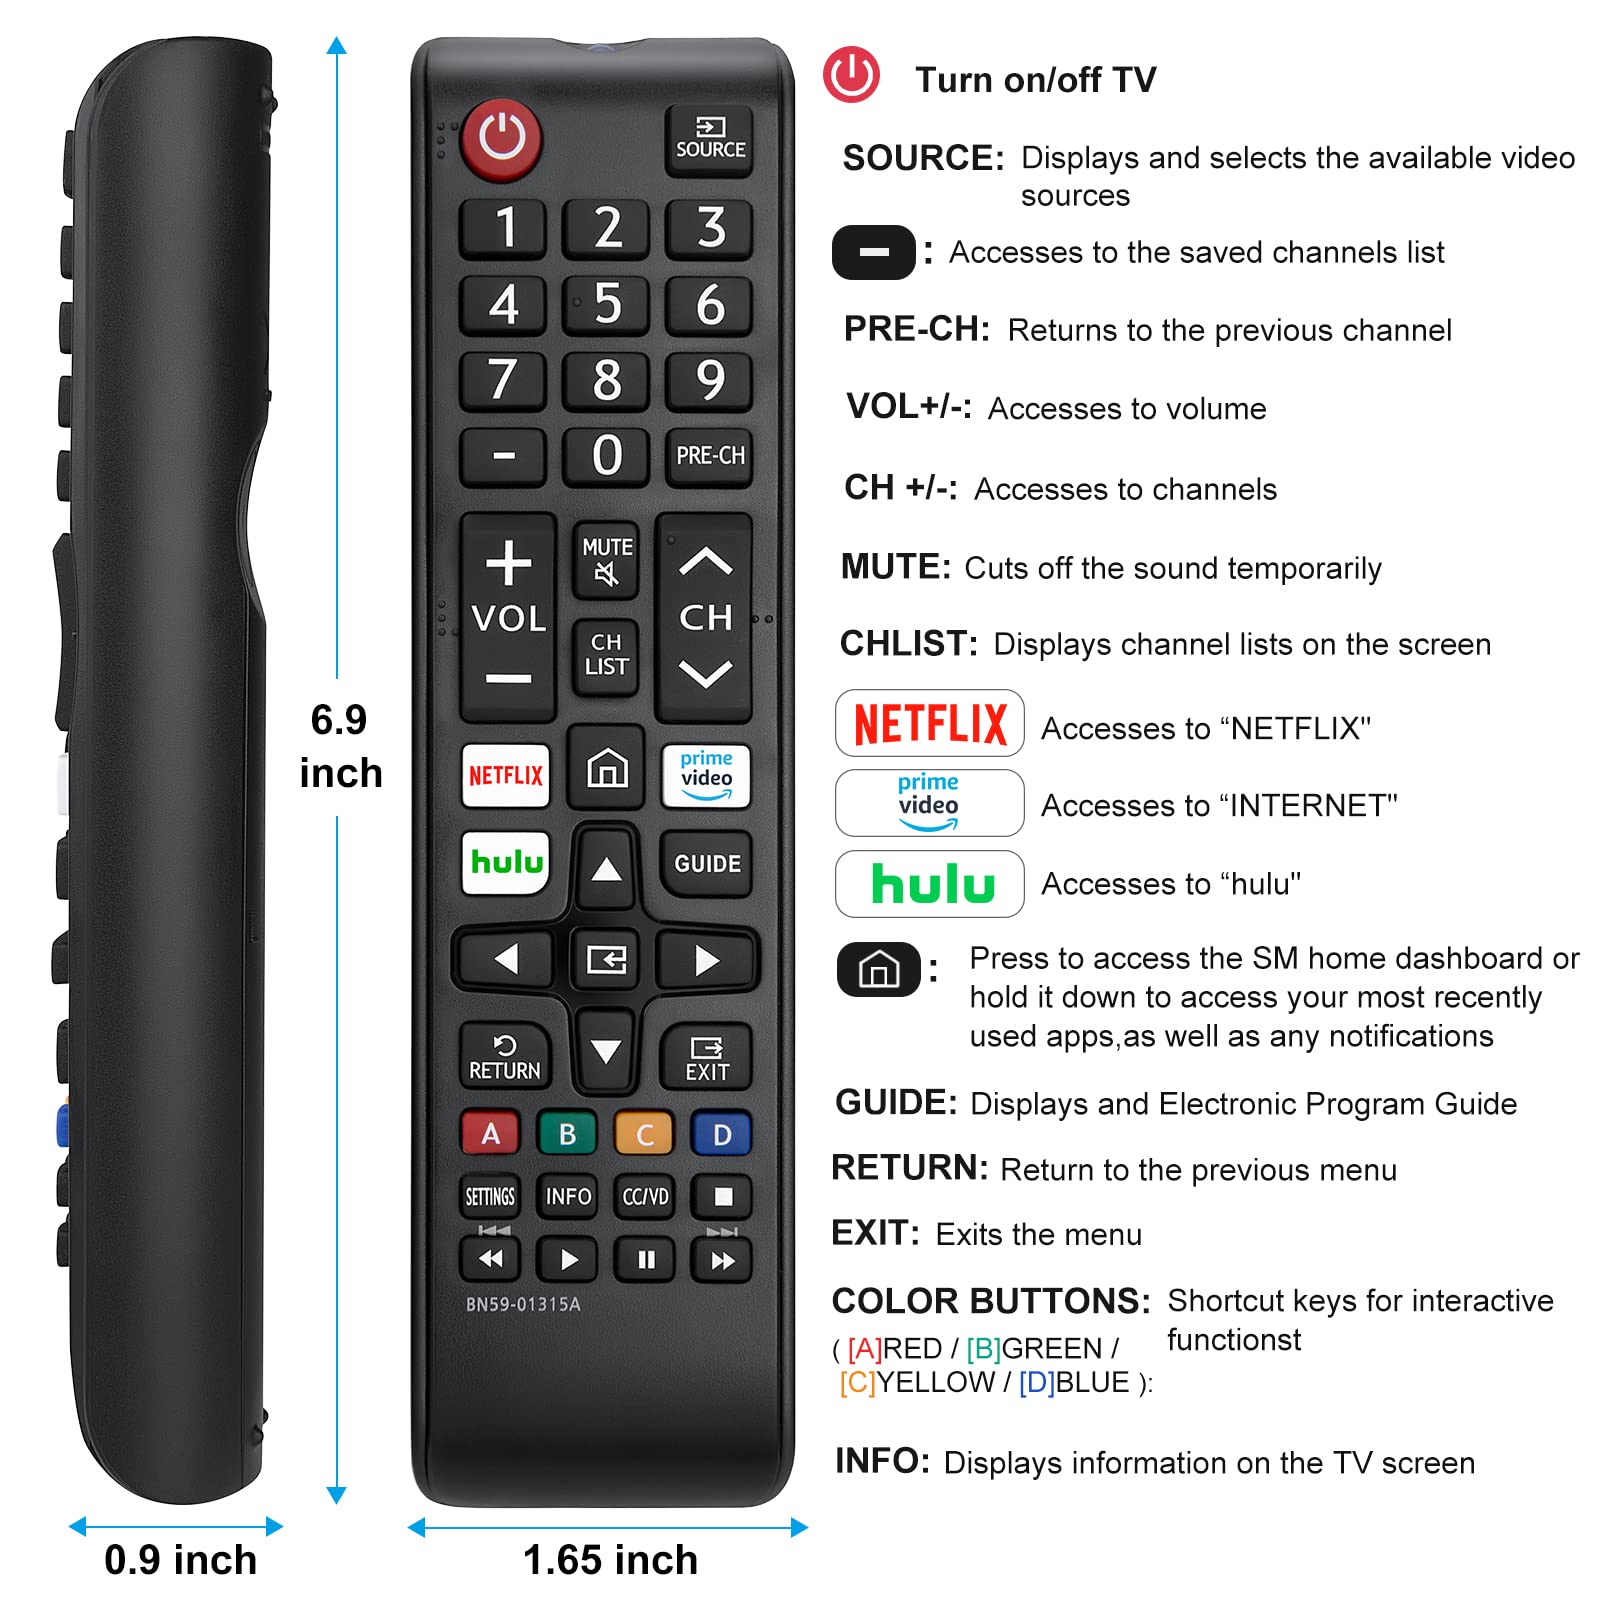 【Pack of 2】 New Universal Remote for All Samsung TV Remote, Replacement Compatible for All Samsung Smart TV, LED, LCD, HDTV, 3D, Series TV